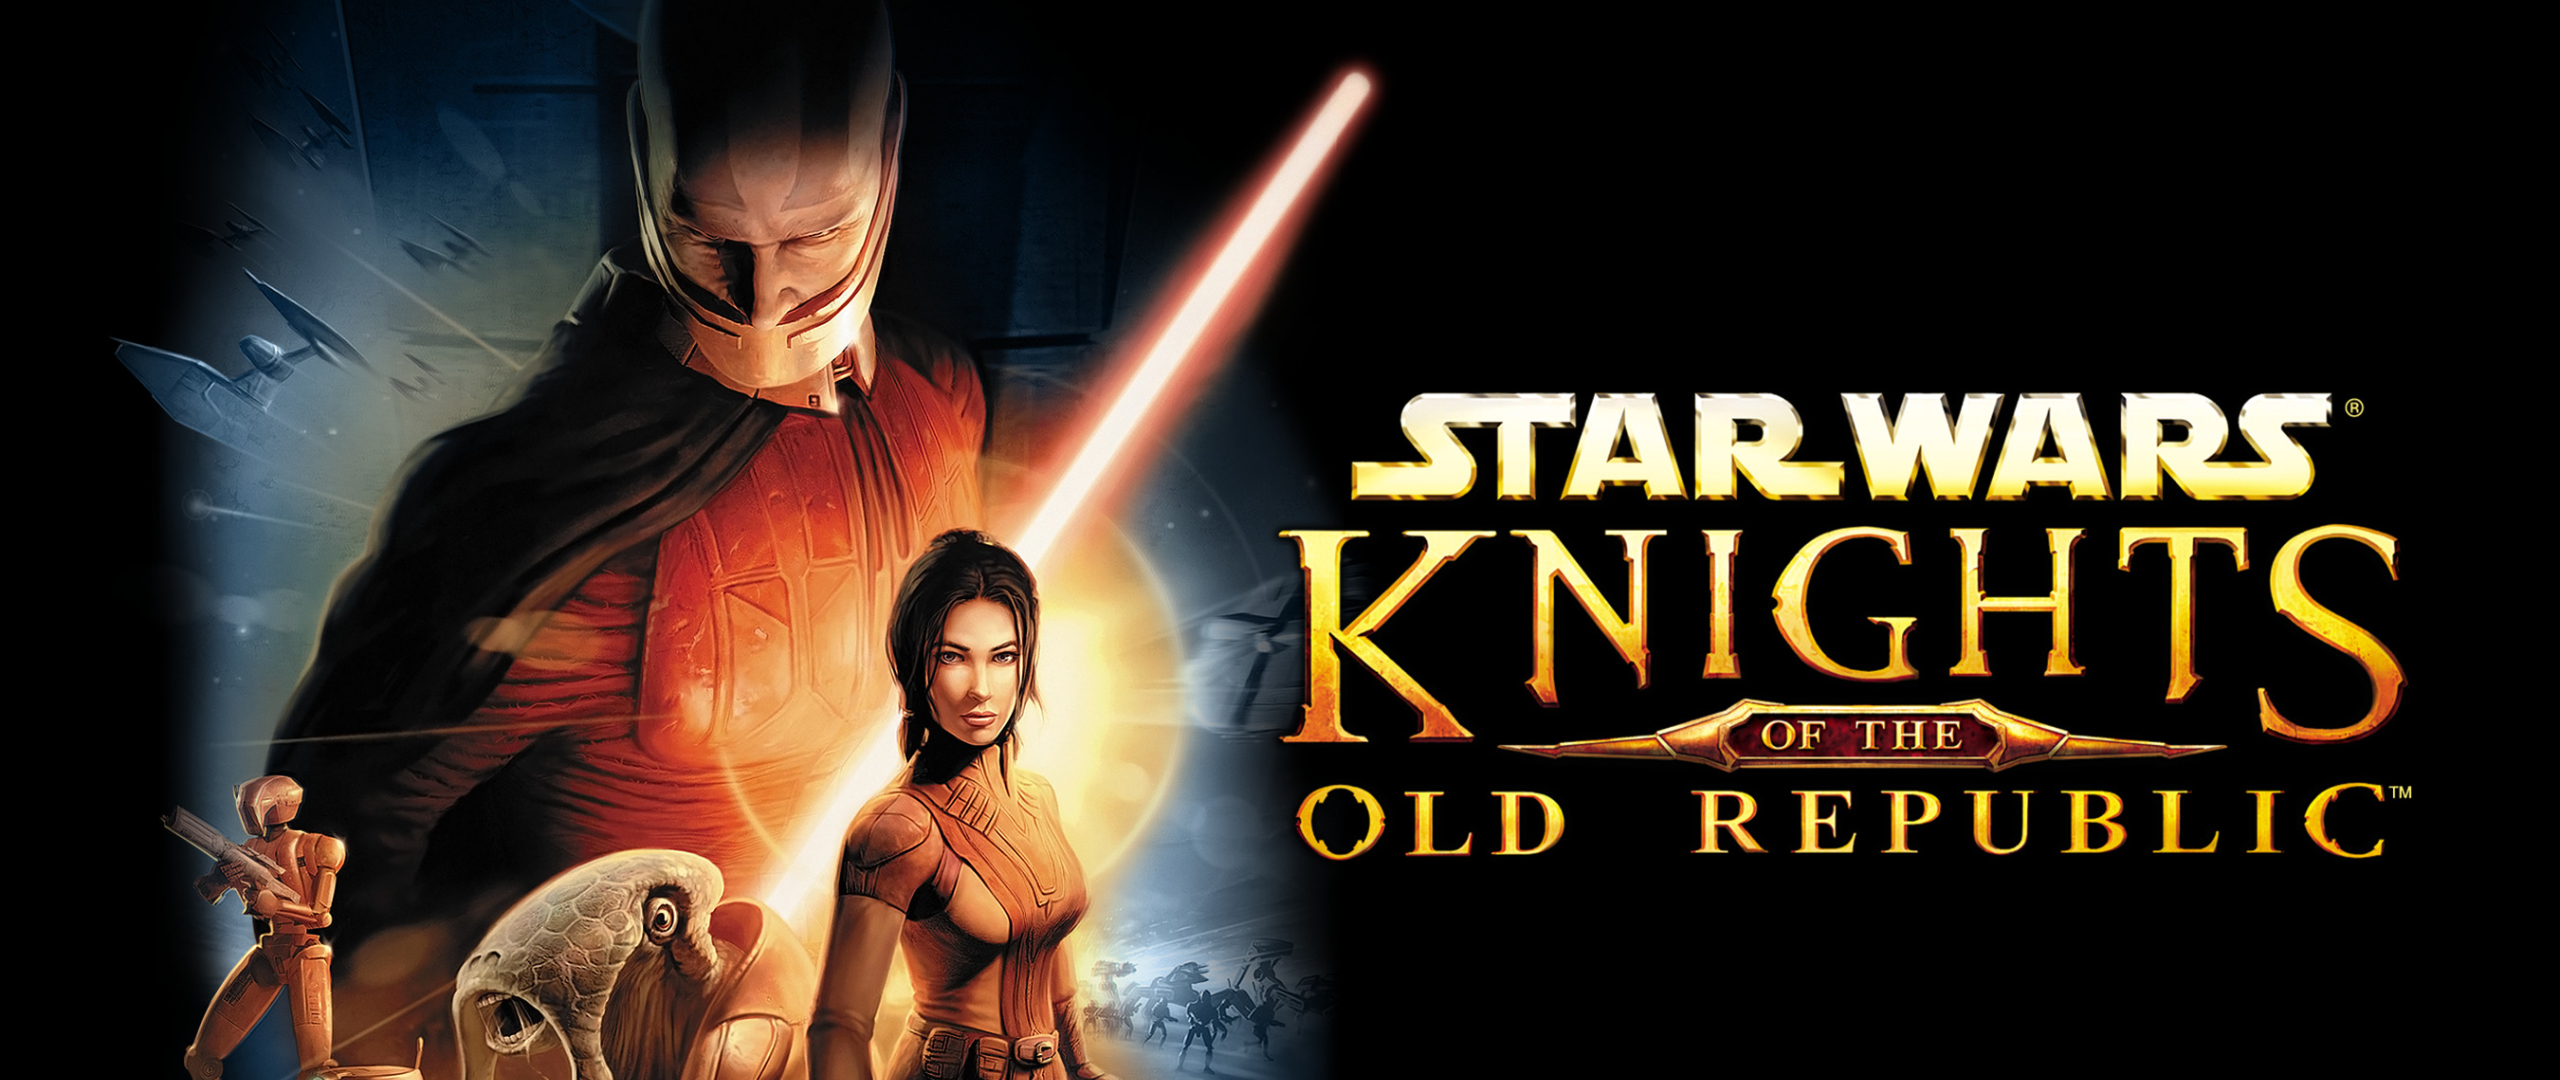 Star wars the knight of the old republic русификатор steam фото 88